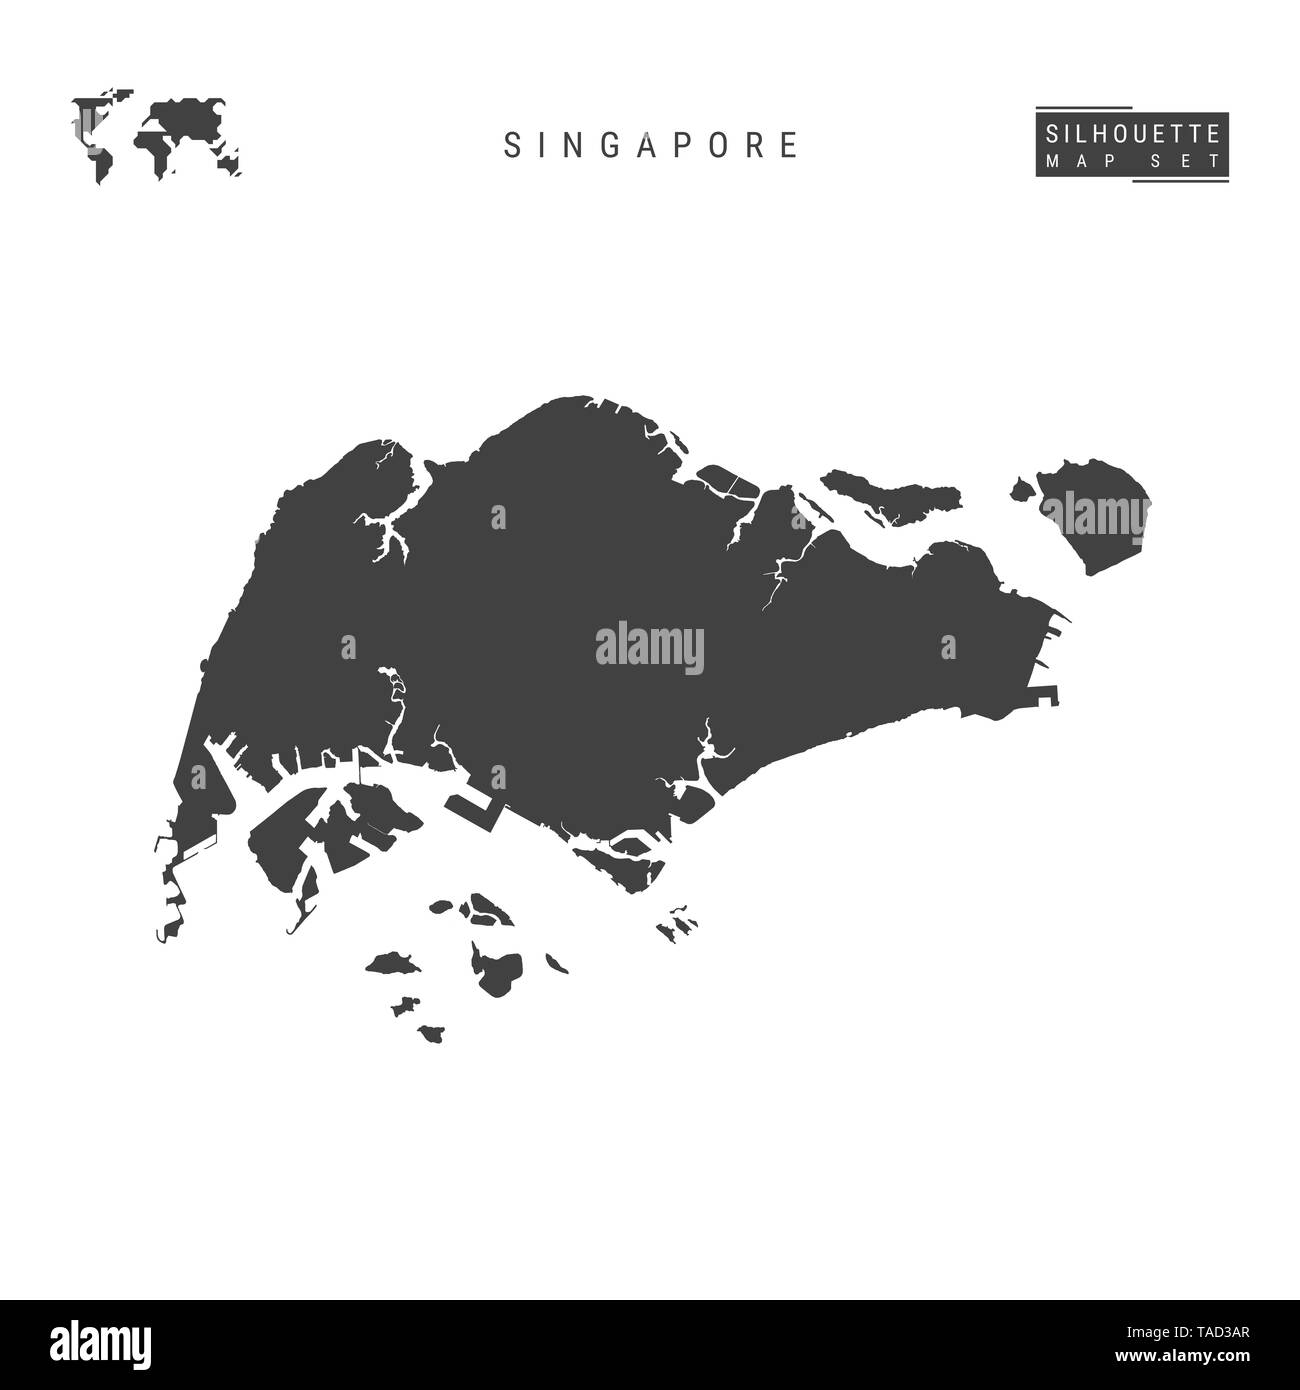 Singapore Blank Map Isolated on White Background. High-Detailed Black Silhouette Map of Republic of Singapore. Stock Photo